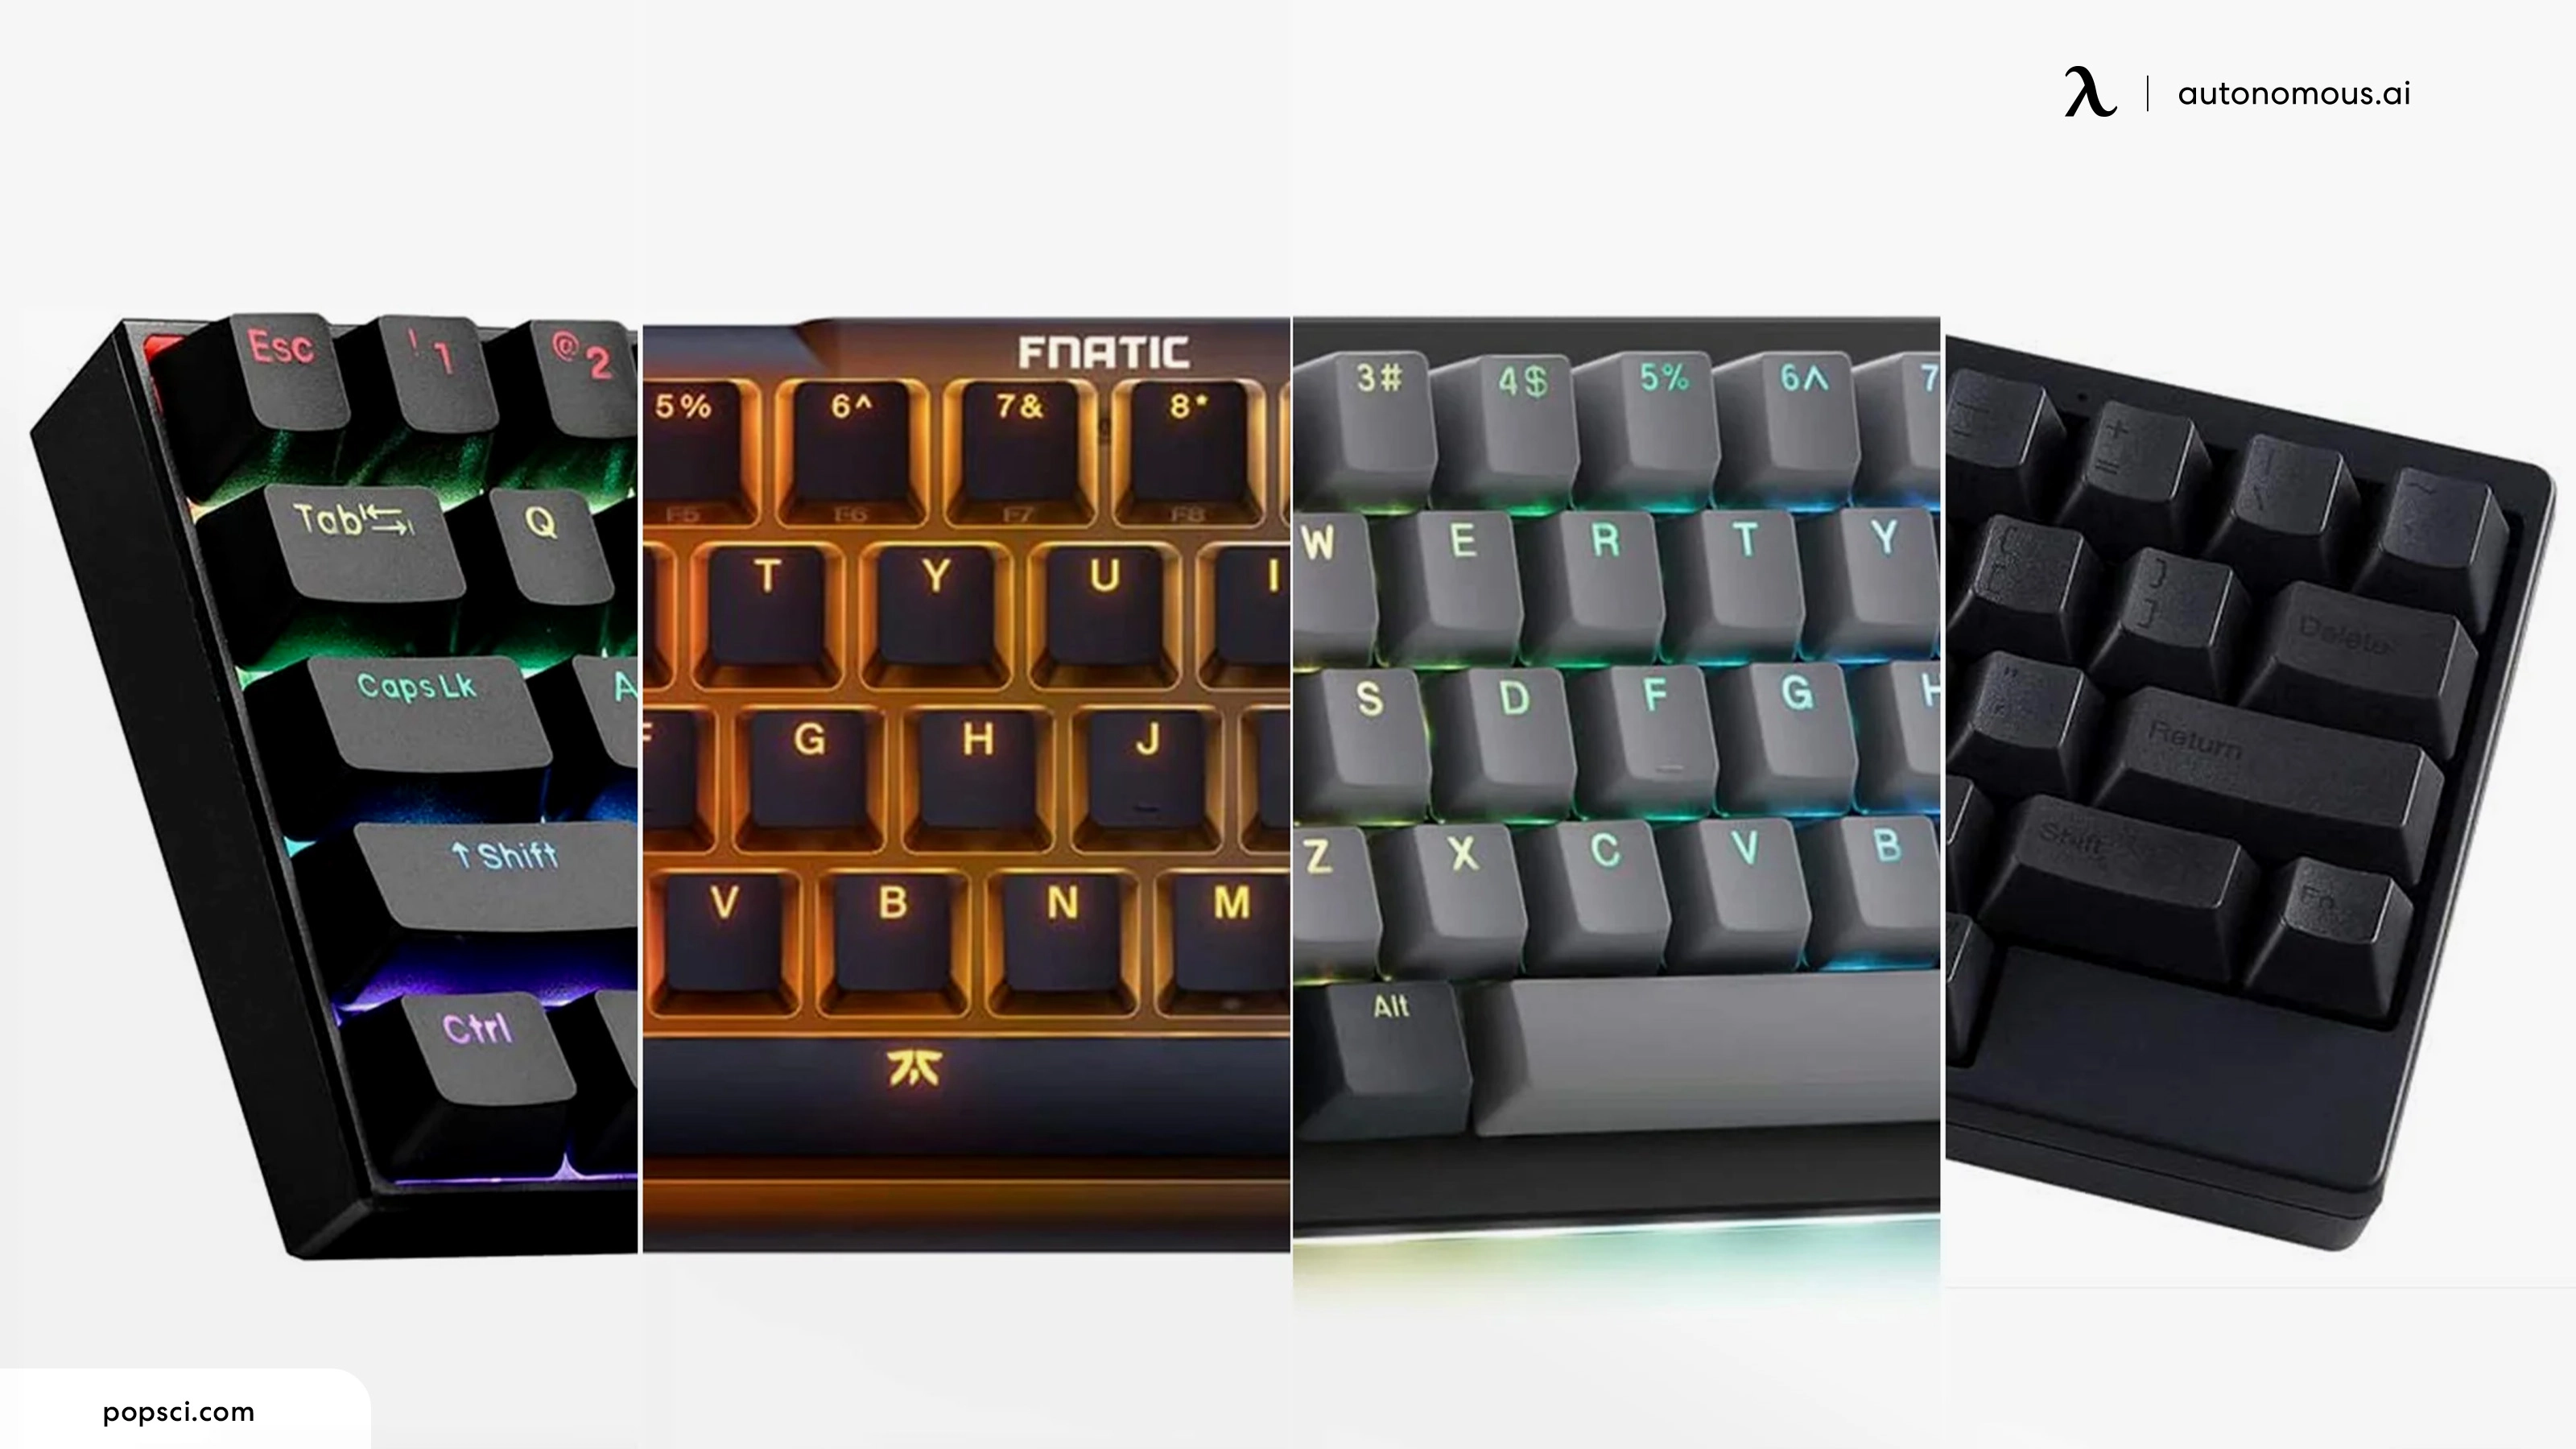 10 Best 60 Percent Keyboards for Working and Gaming (2023)